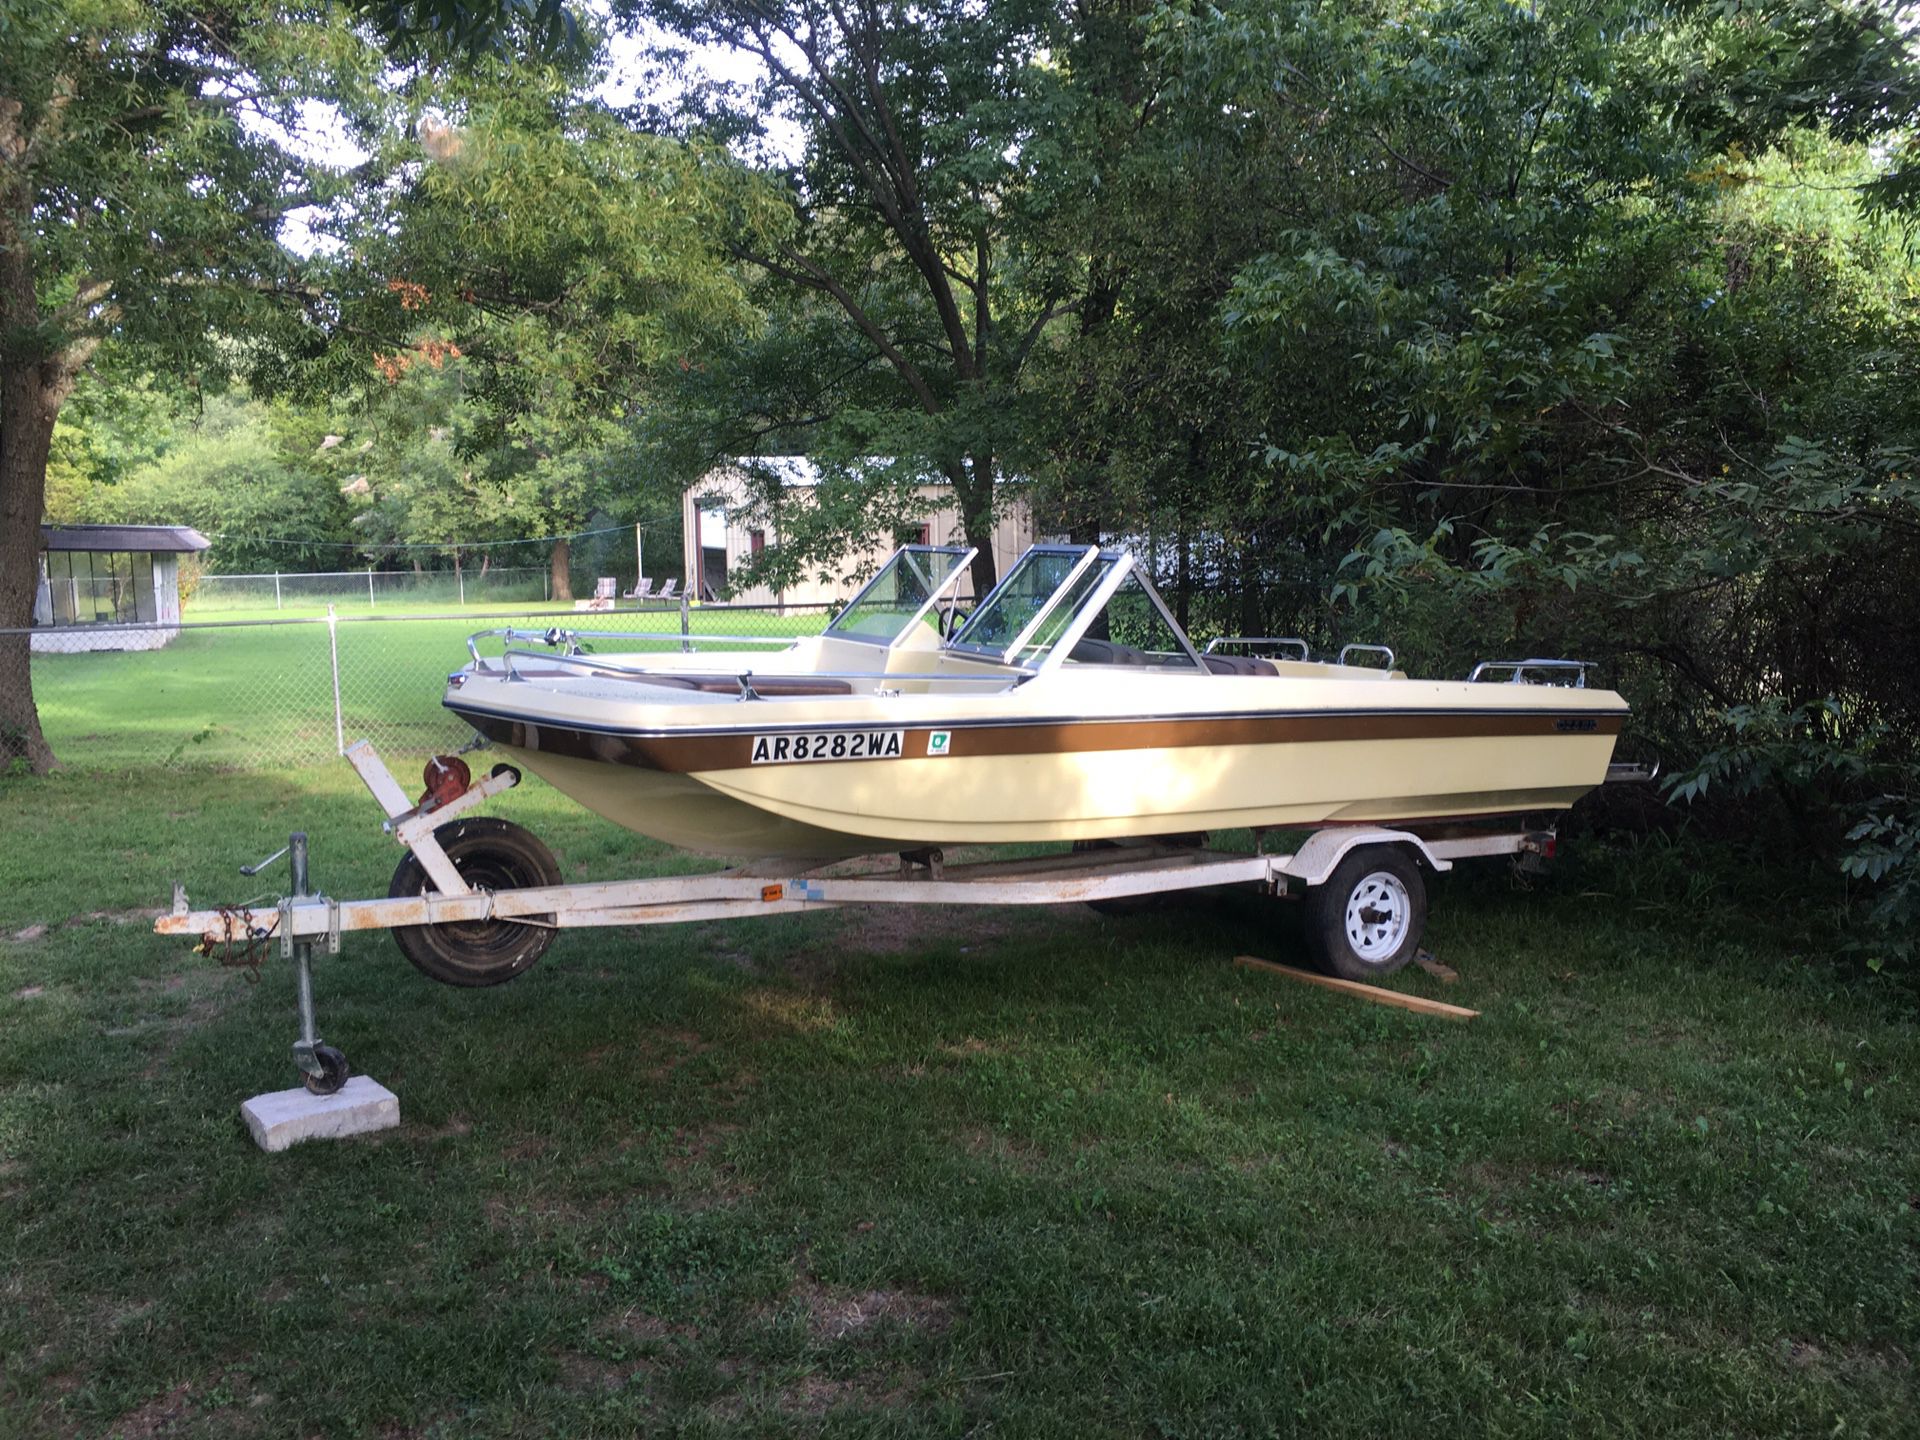 Photo I have a boat for sale for $400 or willing to trade for tools and other things